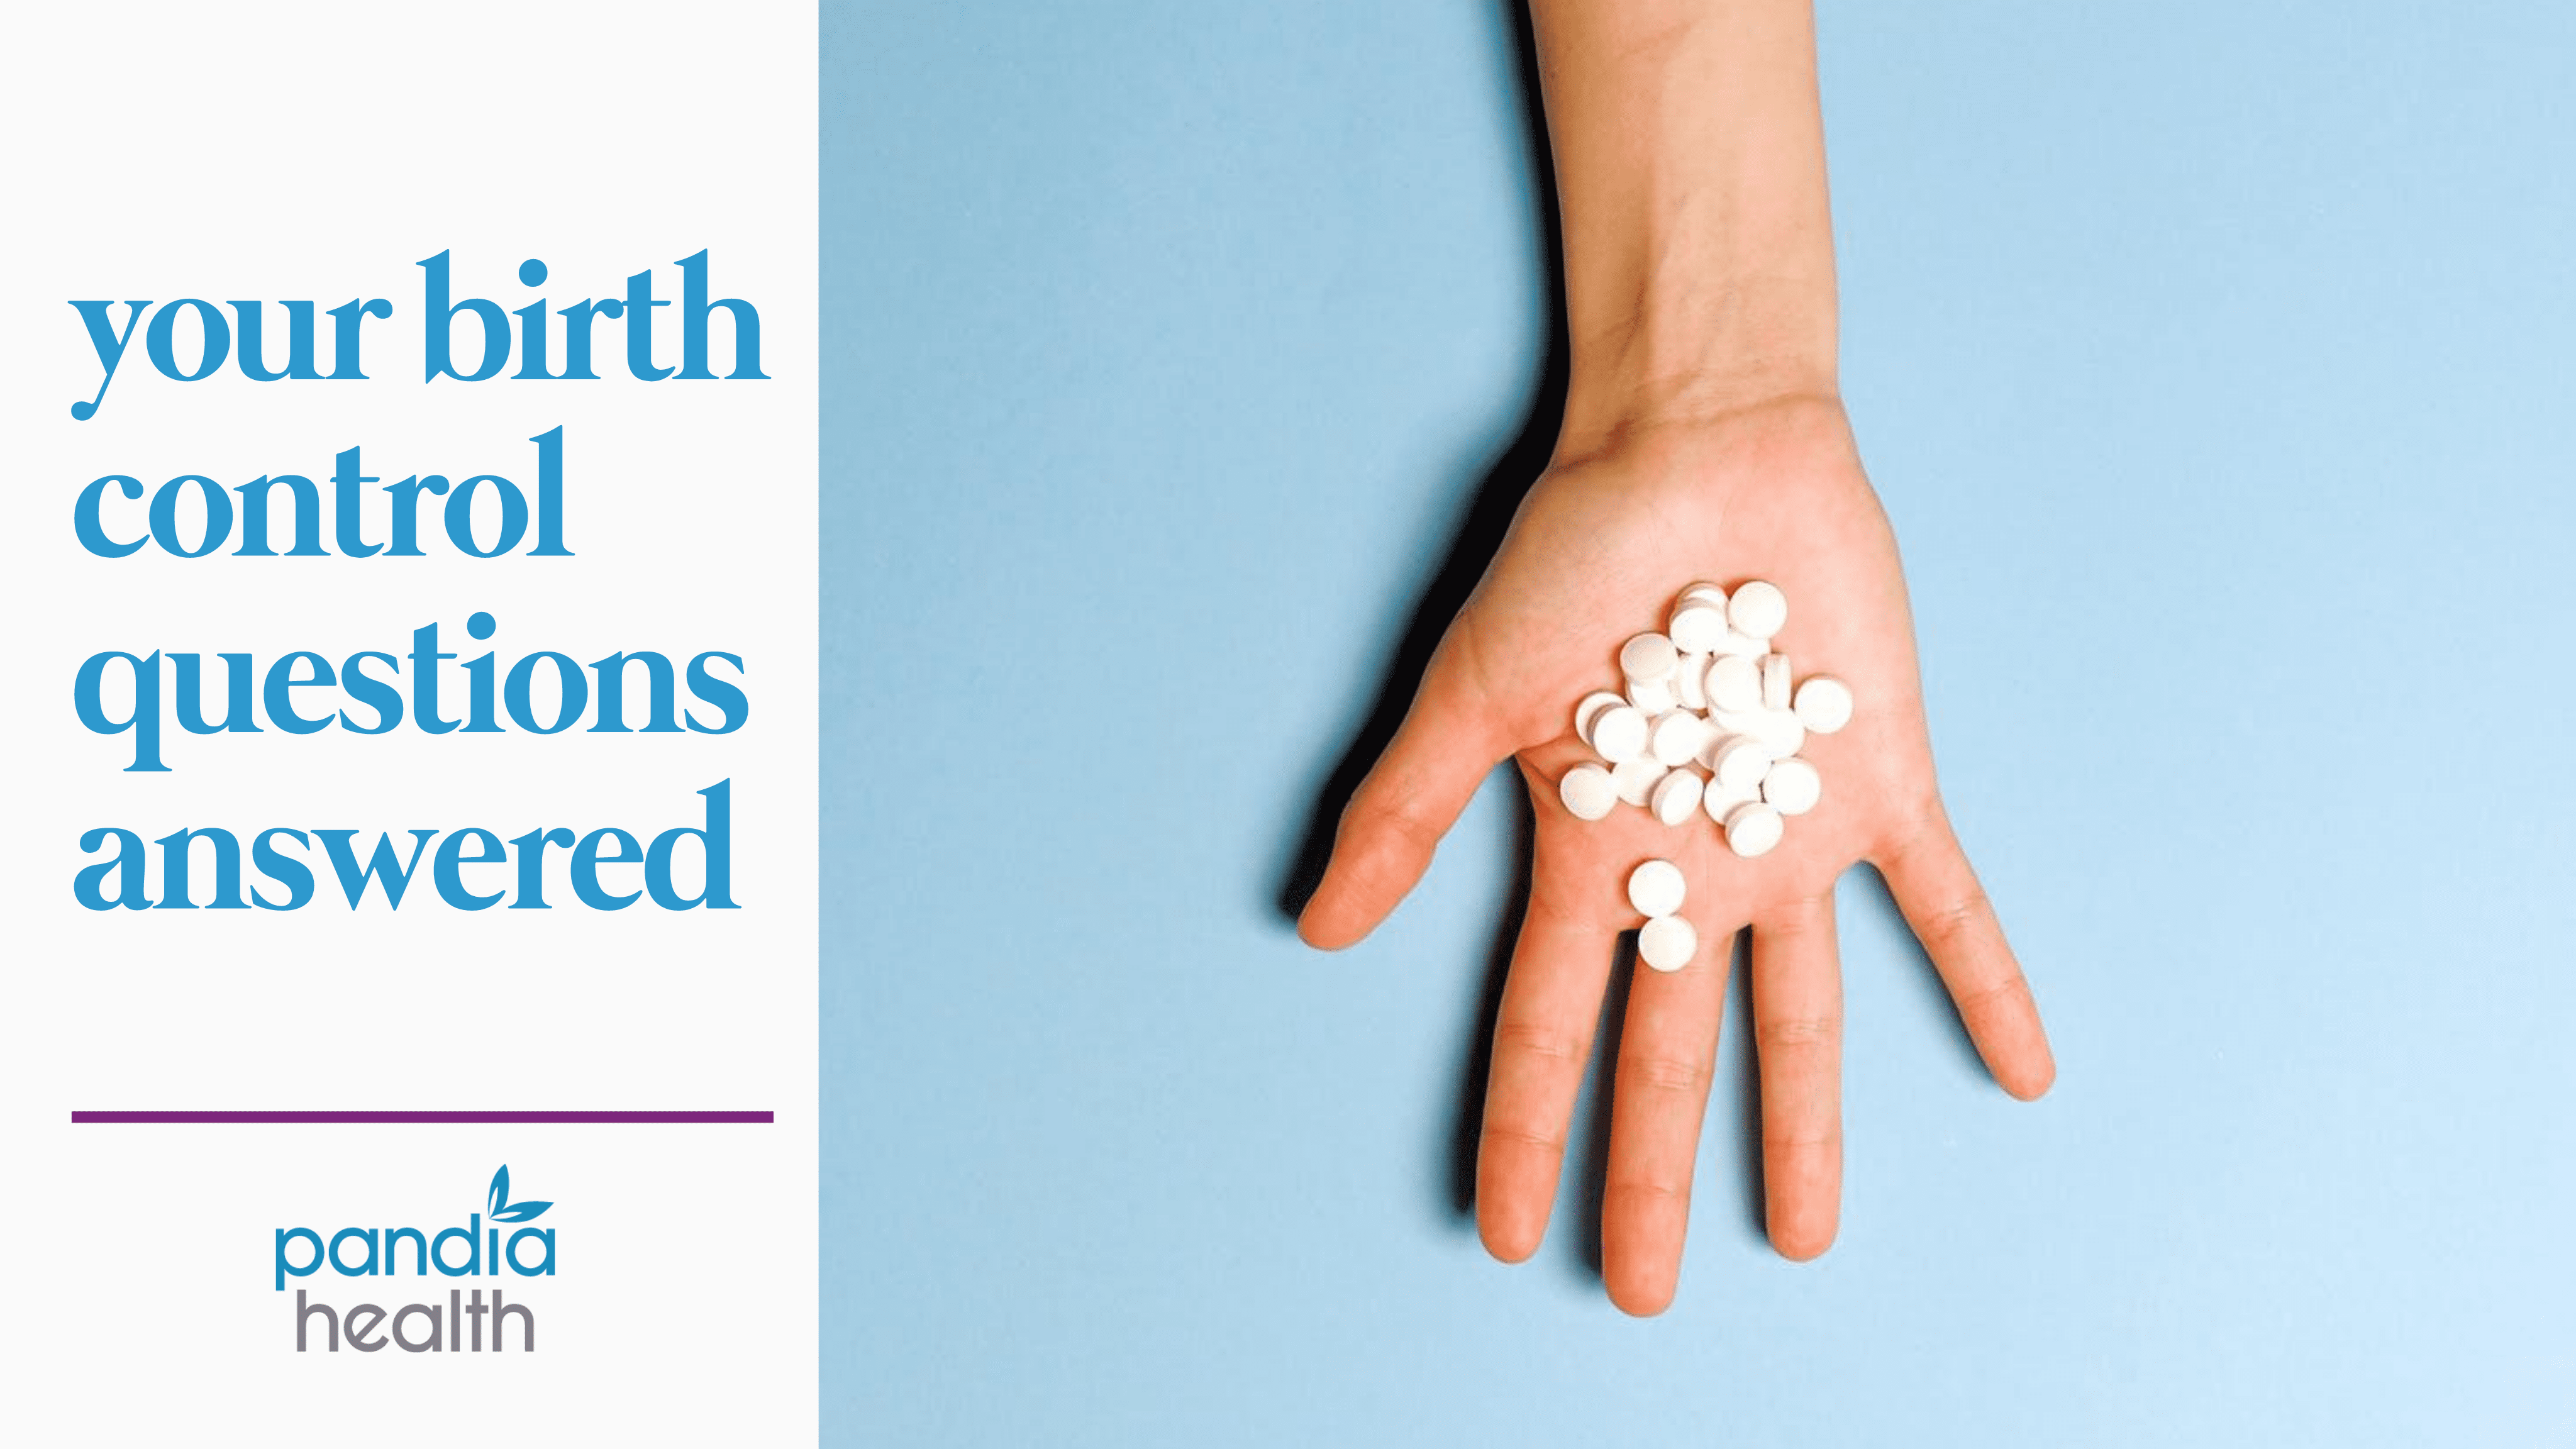 birth control pills in the palm of an outstretched hand